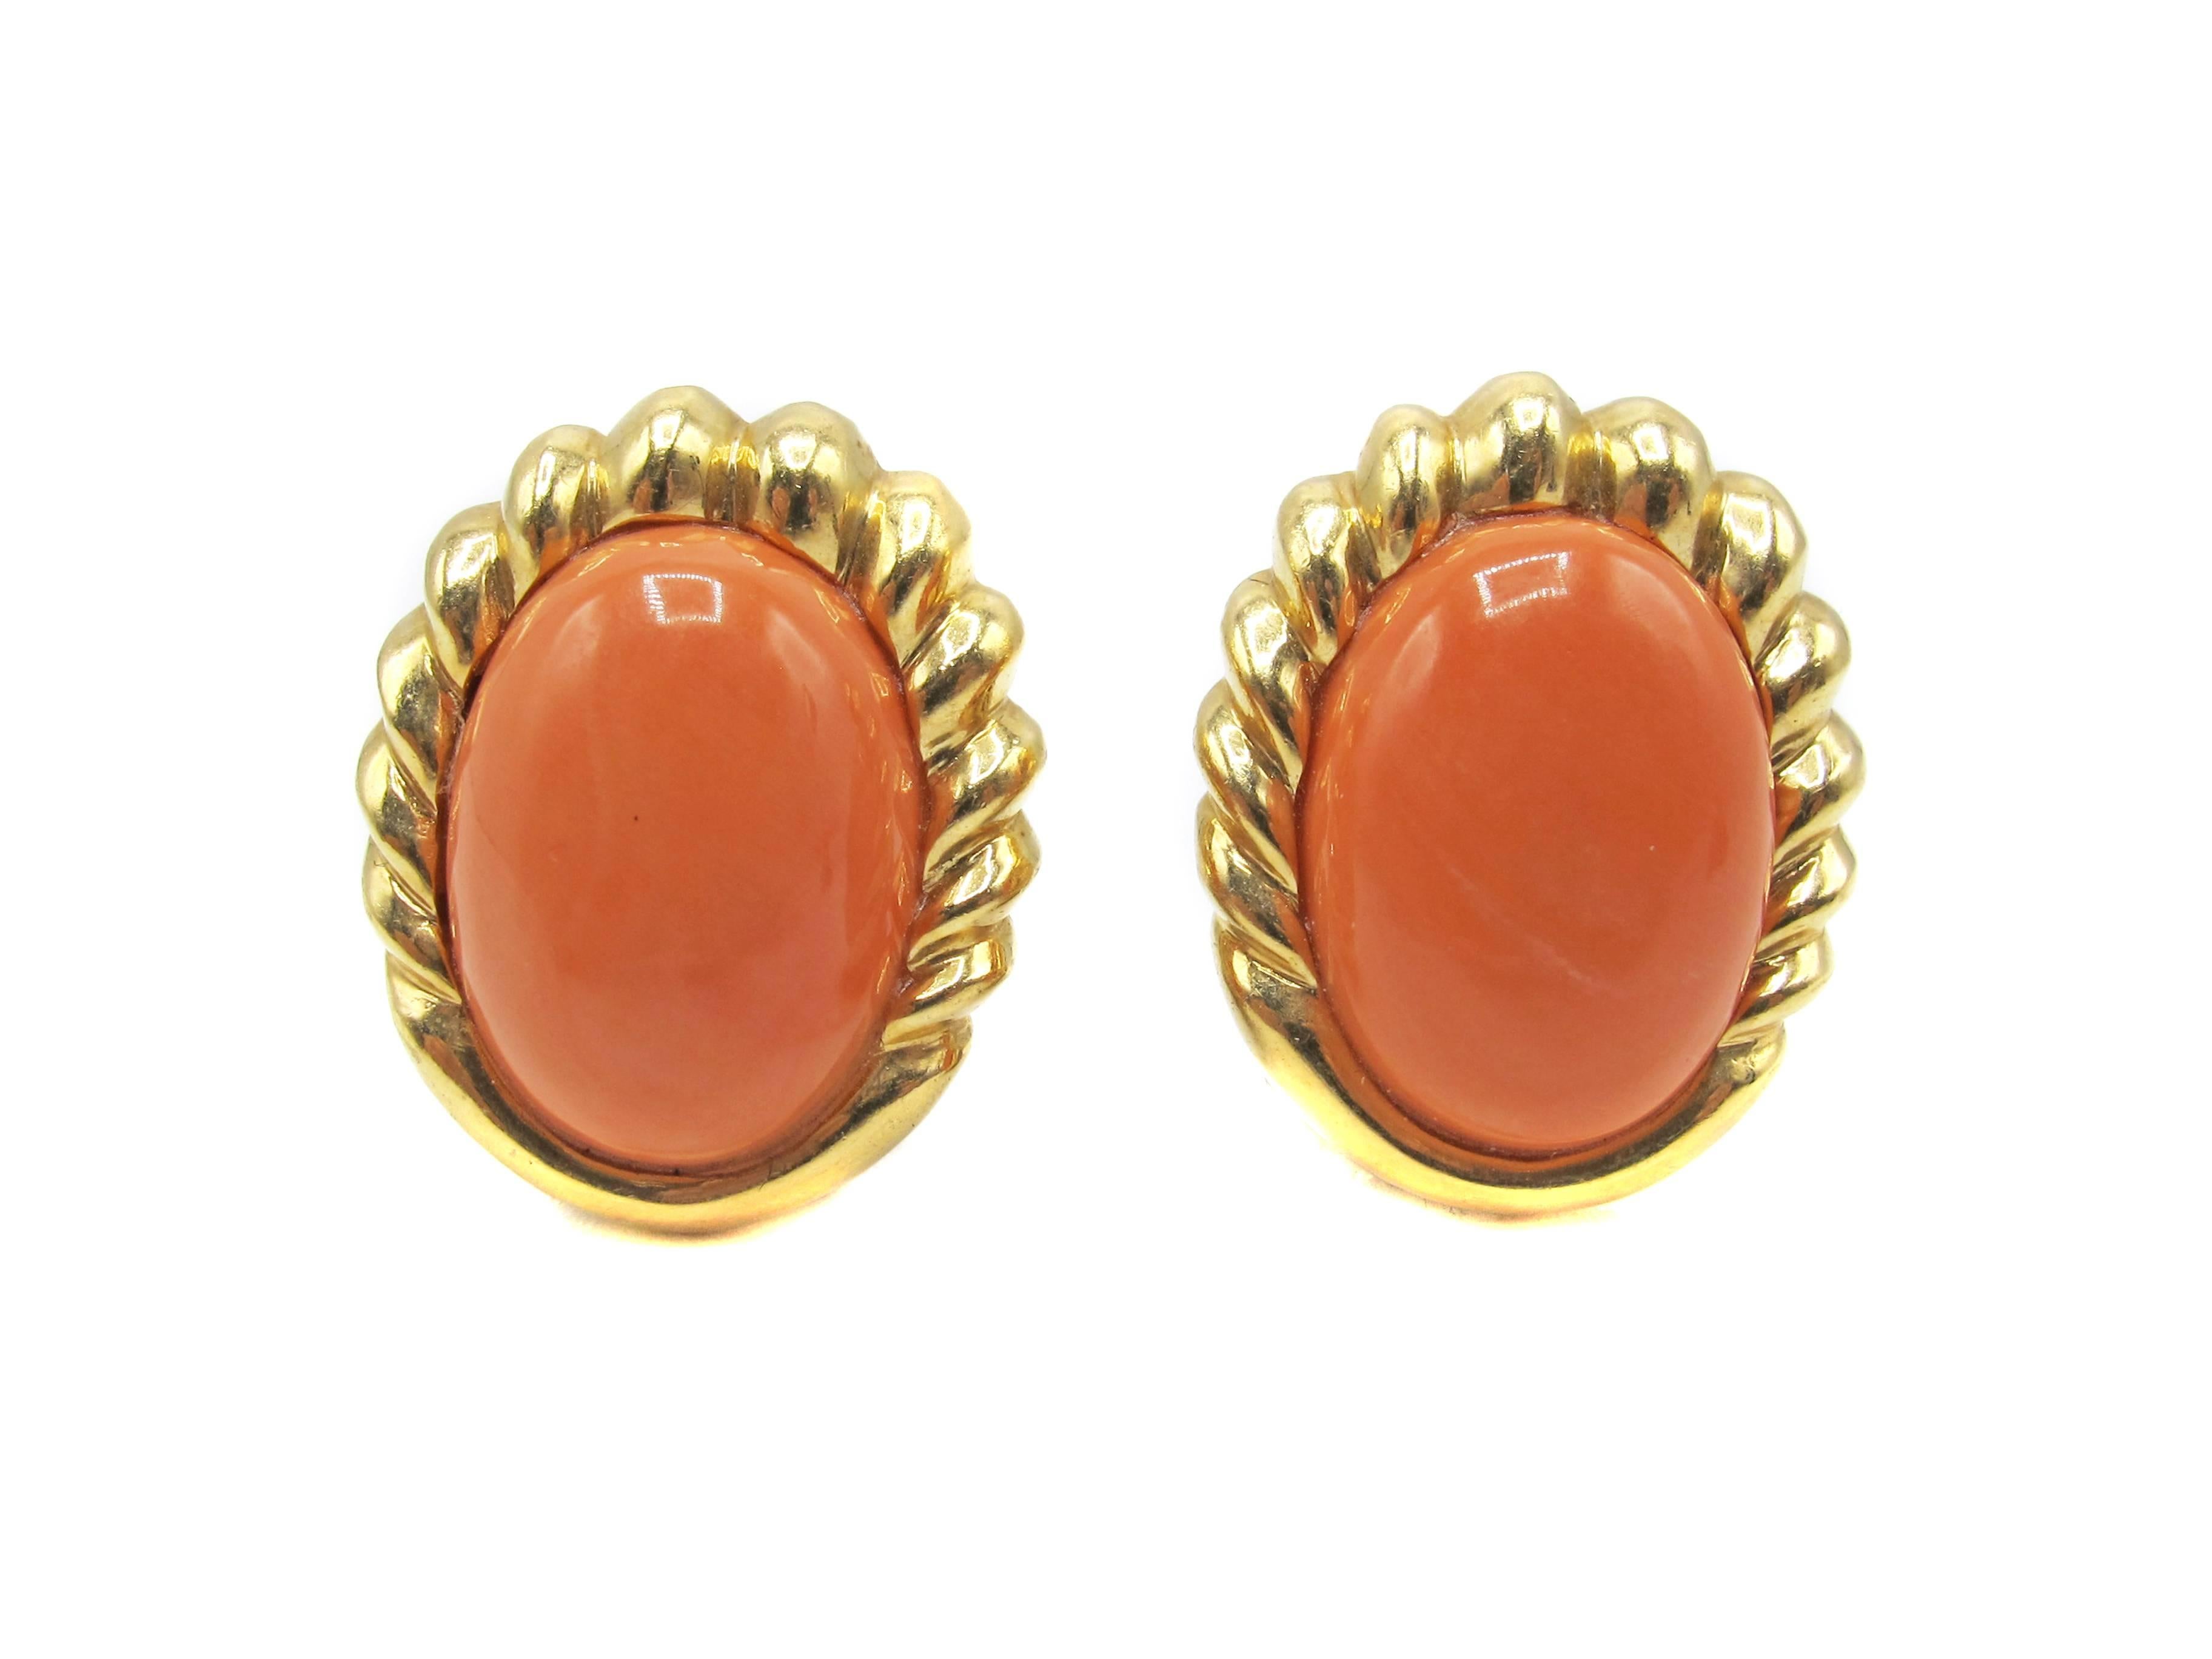 These chic and well hand-crafted ear-clips have a braided bezel which graduates from the top into a band of polished gold. These contain 2 perfectly matched oval cabochon Mediterranean corals which a rich deep pink color. Each piece of coral